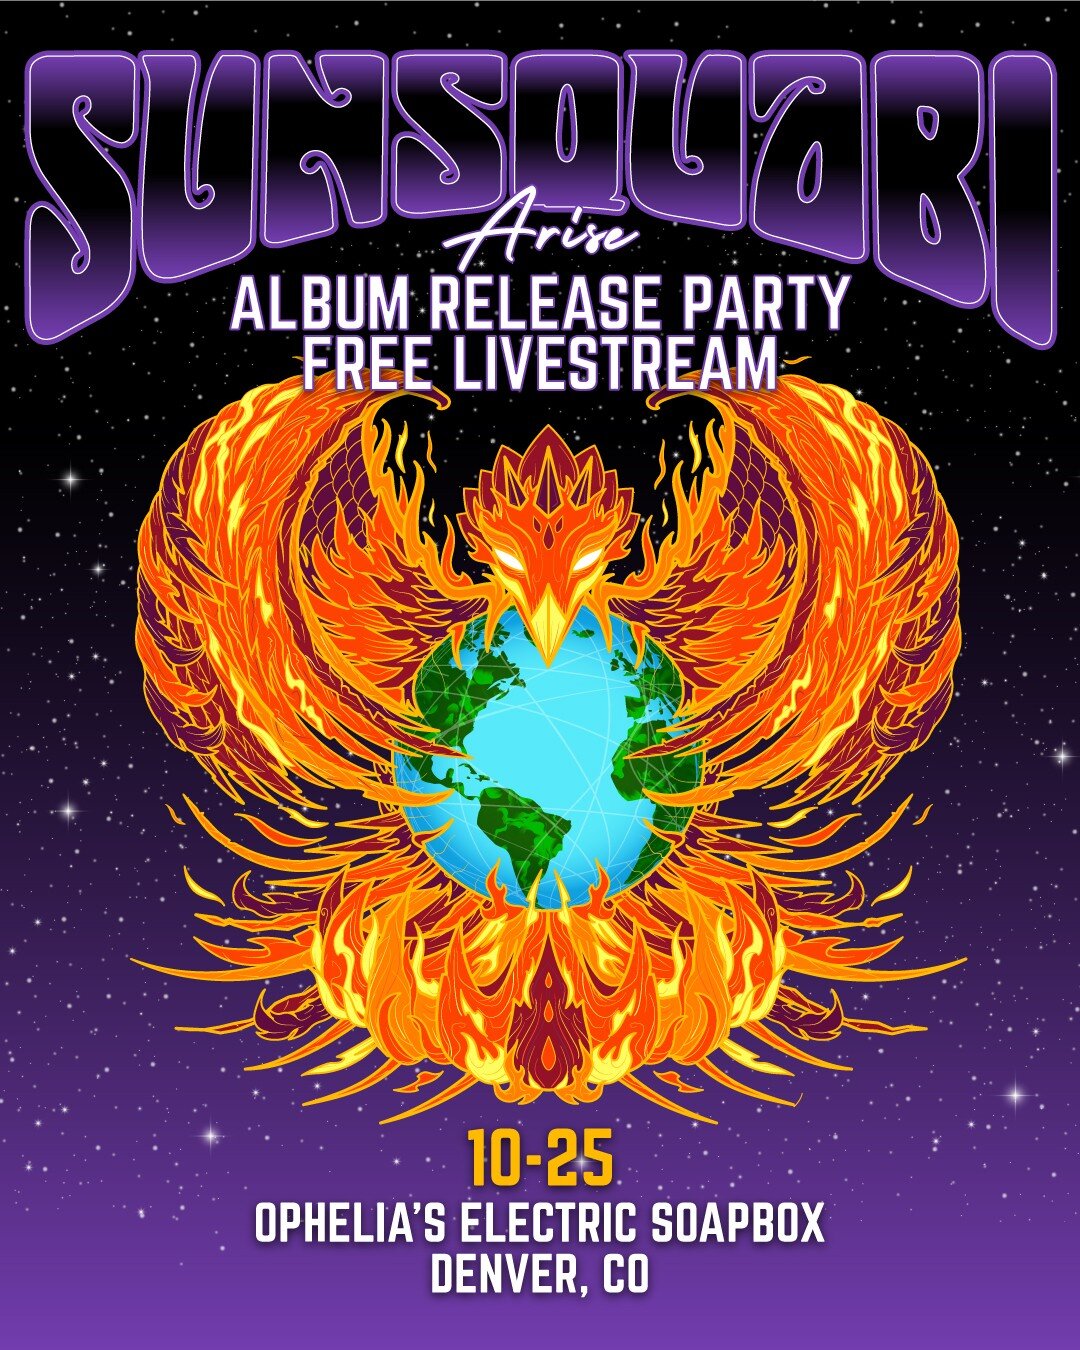 🚨Heads up! For those who didn't win tickets or can't make it to tonight's 'Arise' Album Release Party, we will be streaming live for FREE so you can enjoy from anywhere. We'll be broadcasting the entire show live on YouTube, Facebook, and Instagram 